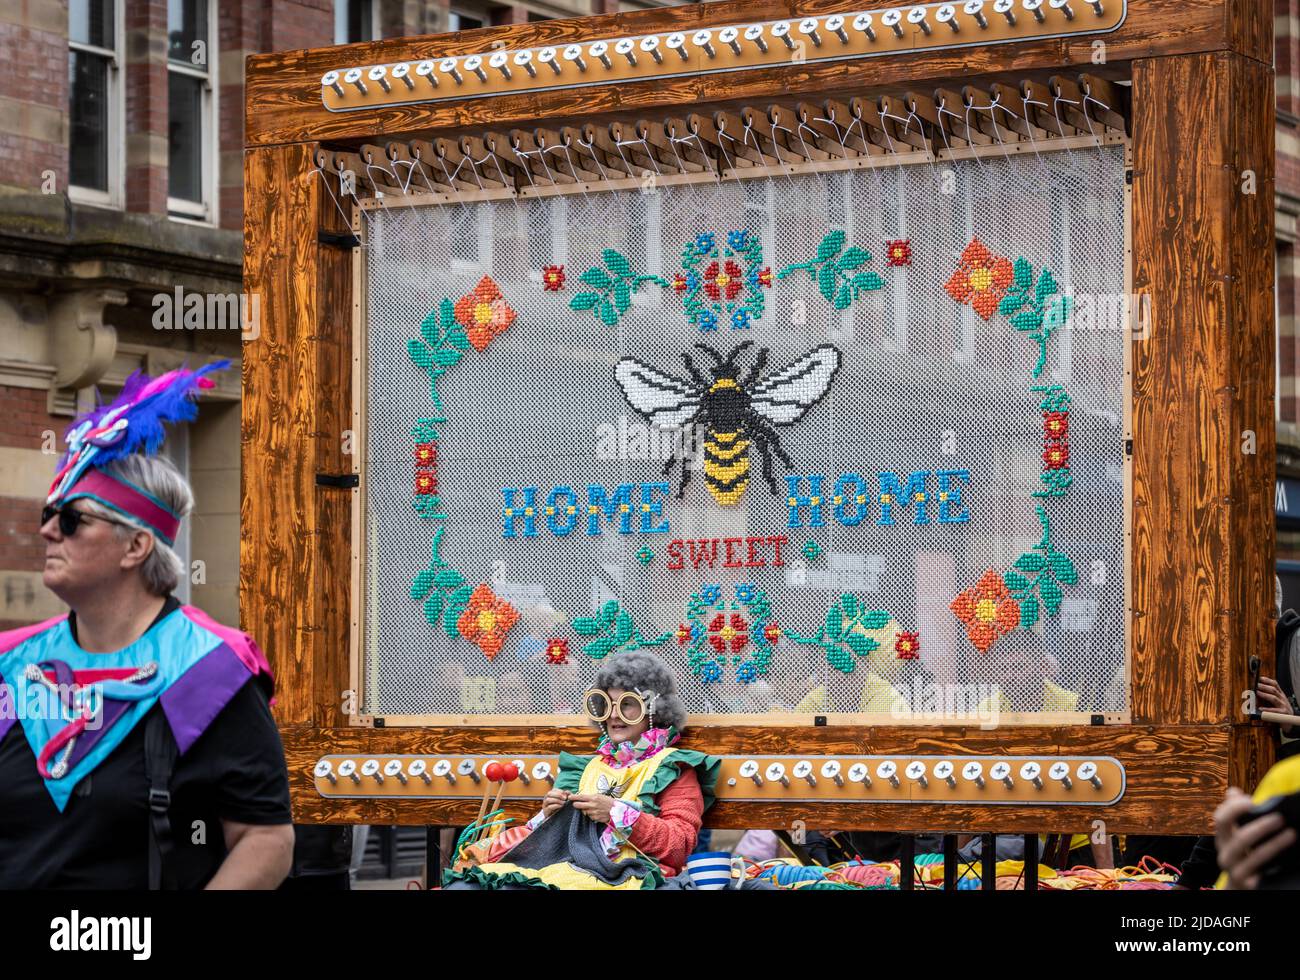 Manchester Day Parade, 19 June 2022: Lady knitting underneath a 'Home sweet home' tapestry Stock Photo